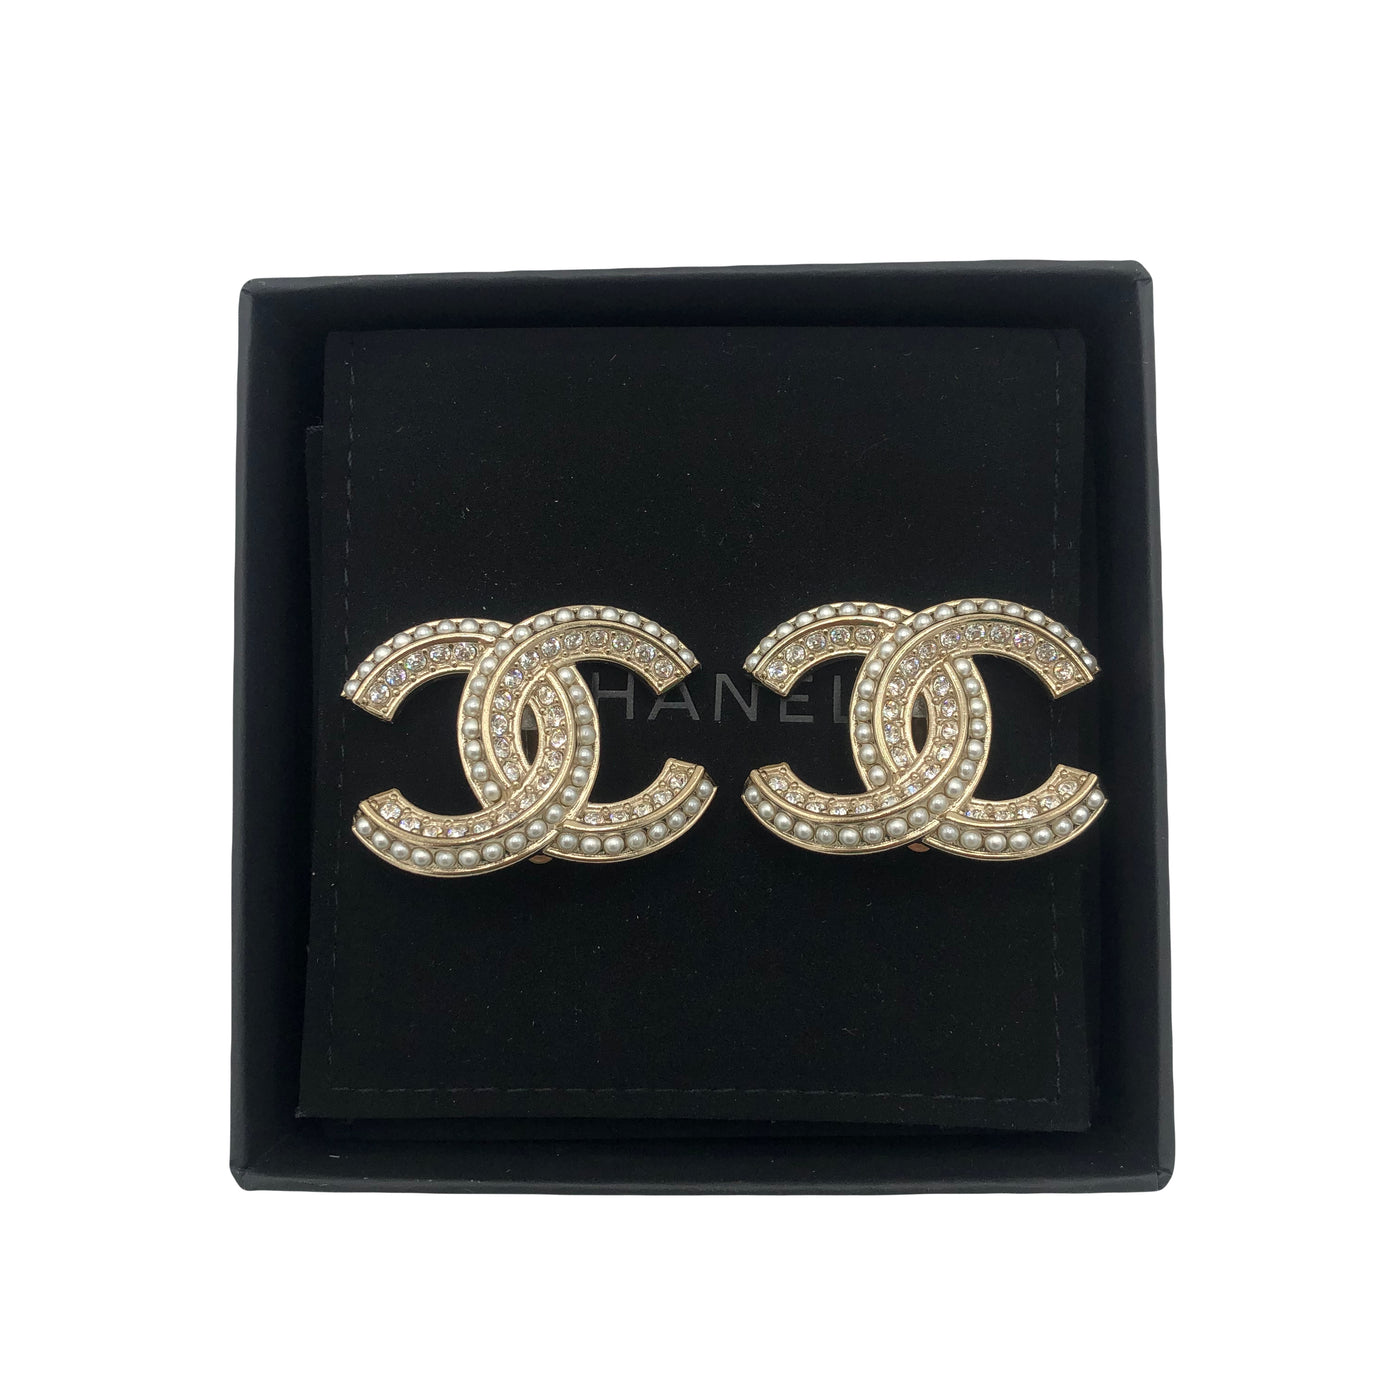 CHANEL large CC gold earrings rhinestone & pearls with box